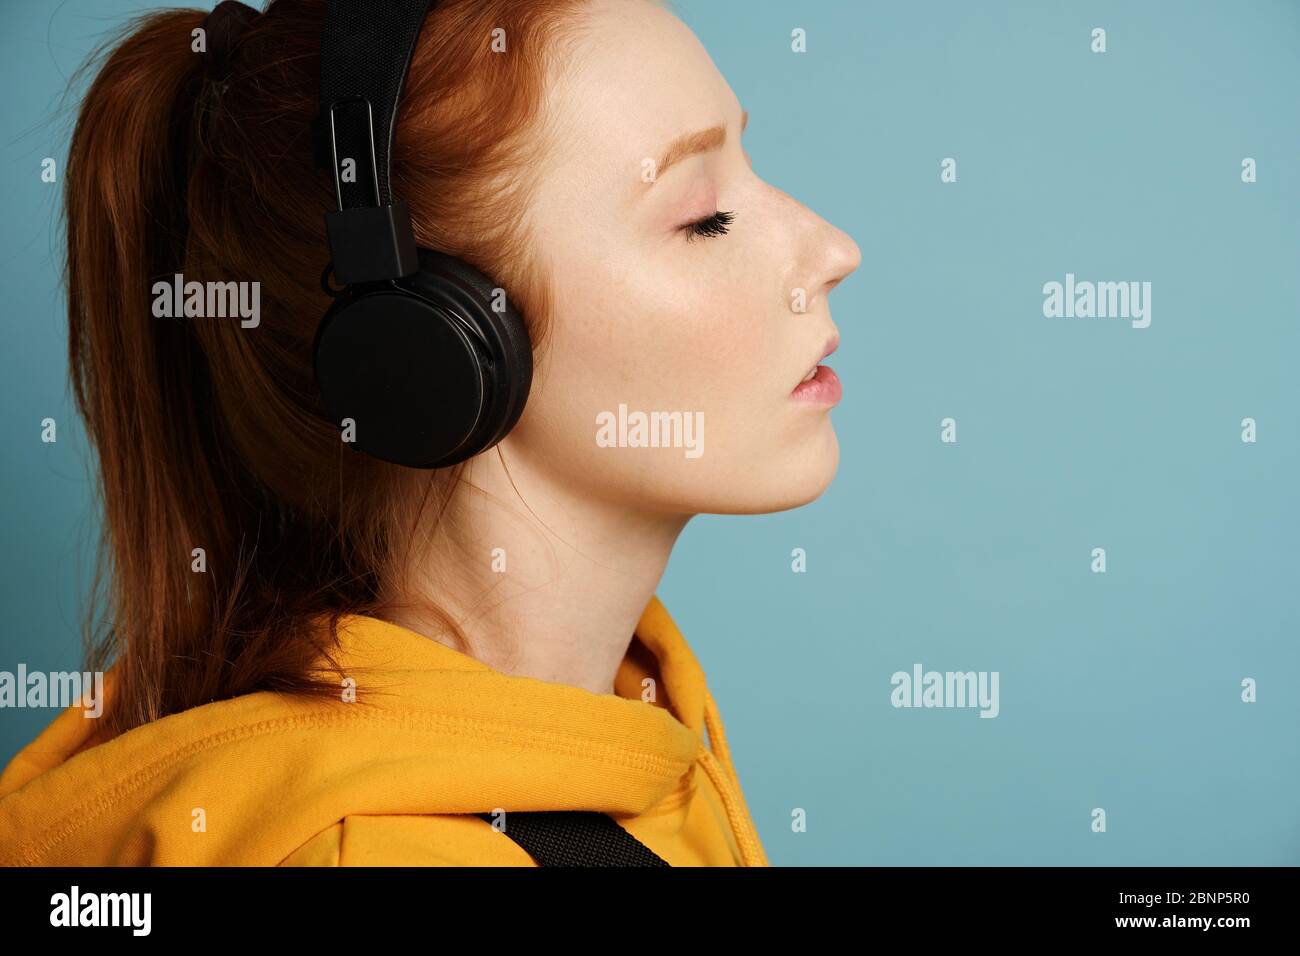 Head shot. A red-haired girl wearing headphones and a yellow hoodie stands on a blue background in a profile with her eyes closed Stock Photo